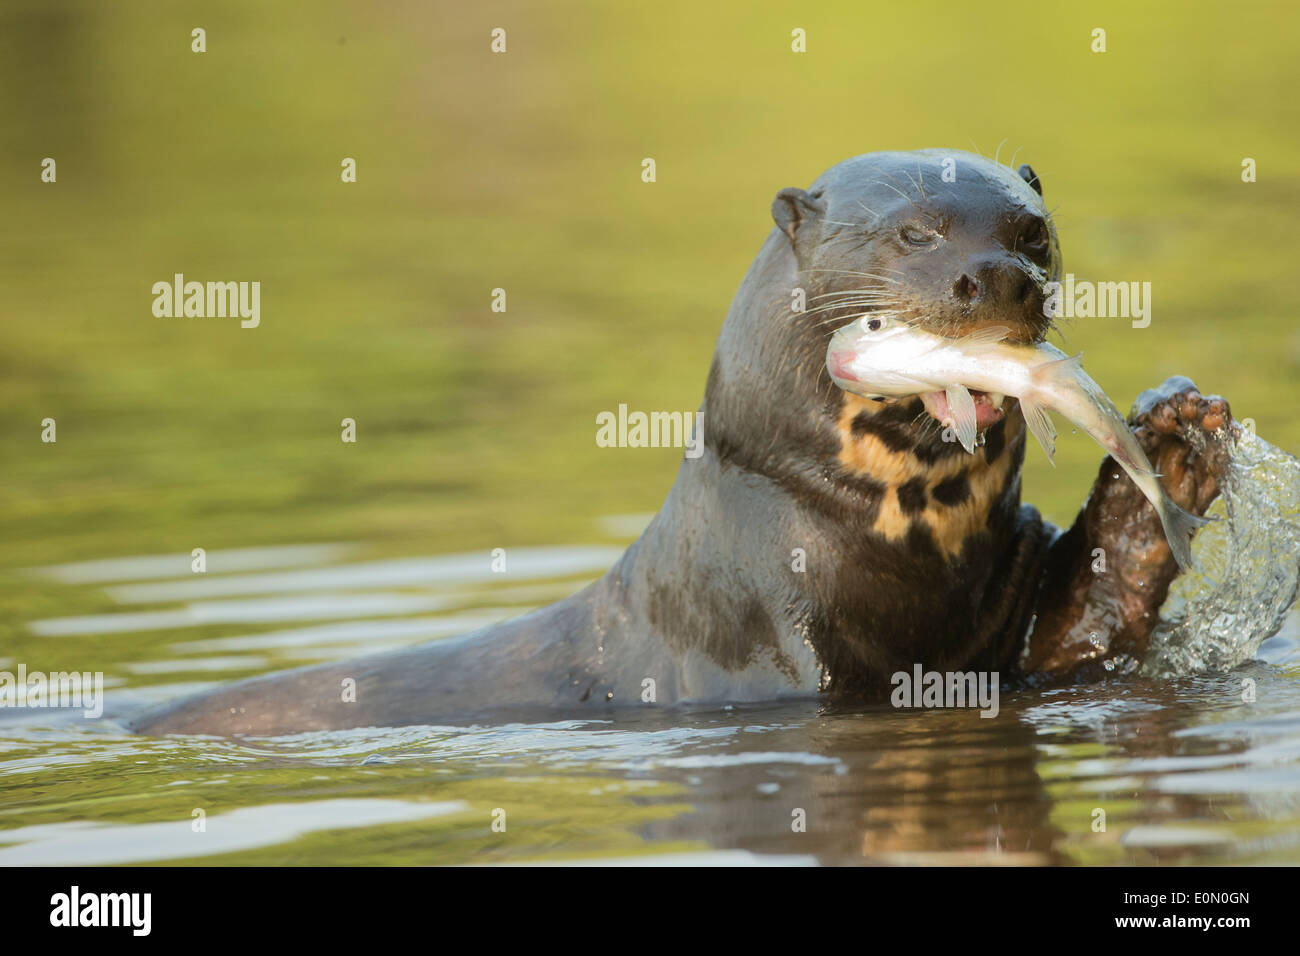 Giant River Otter eating fish, Matto Grosso, Pantanal, Brazil, South ...